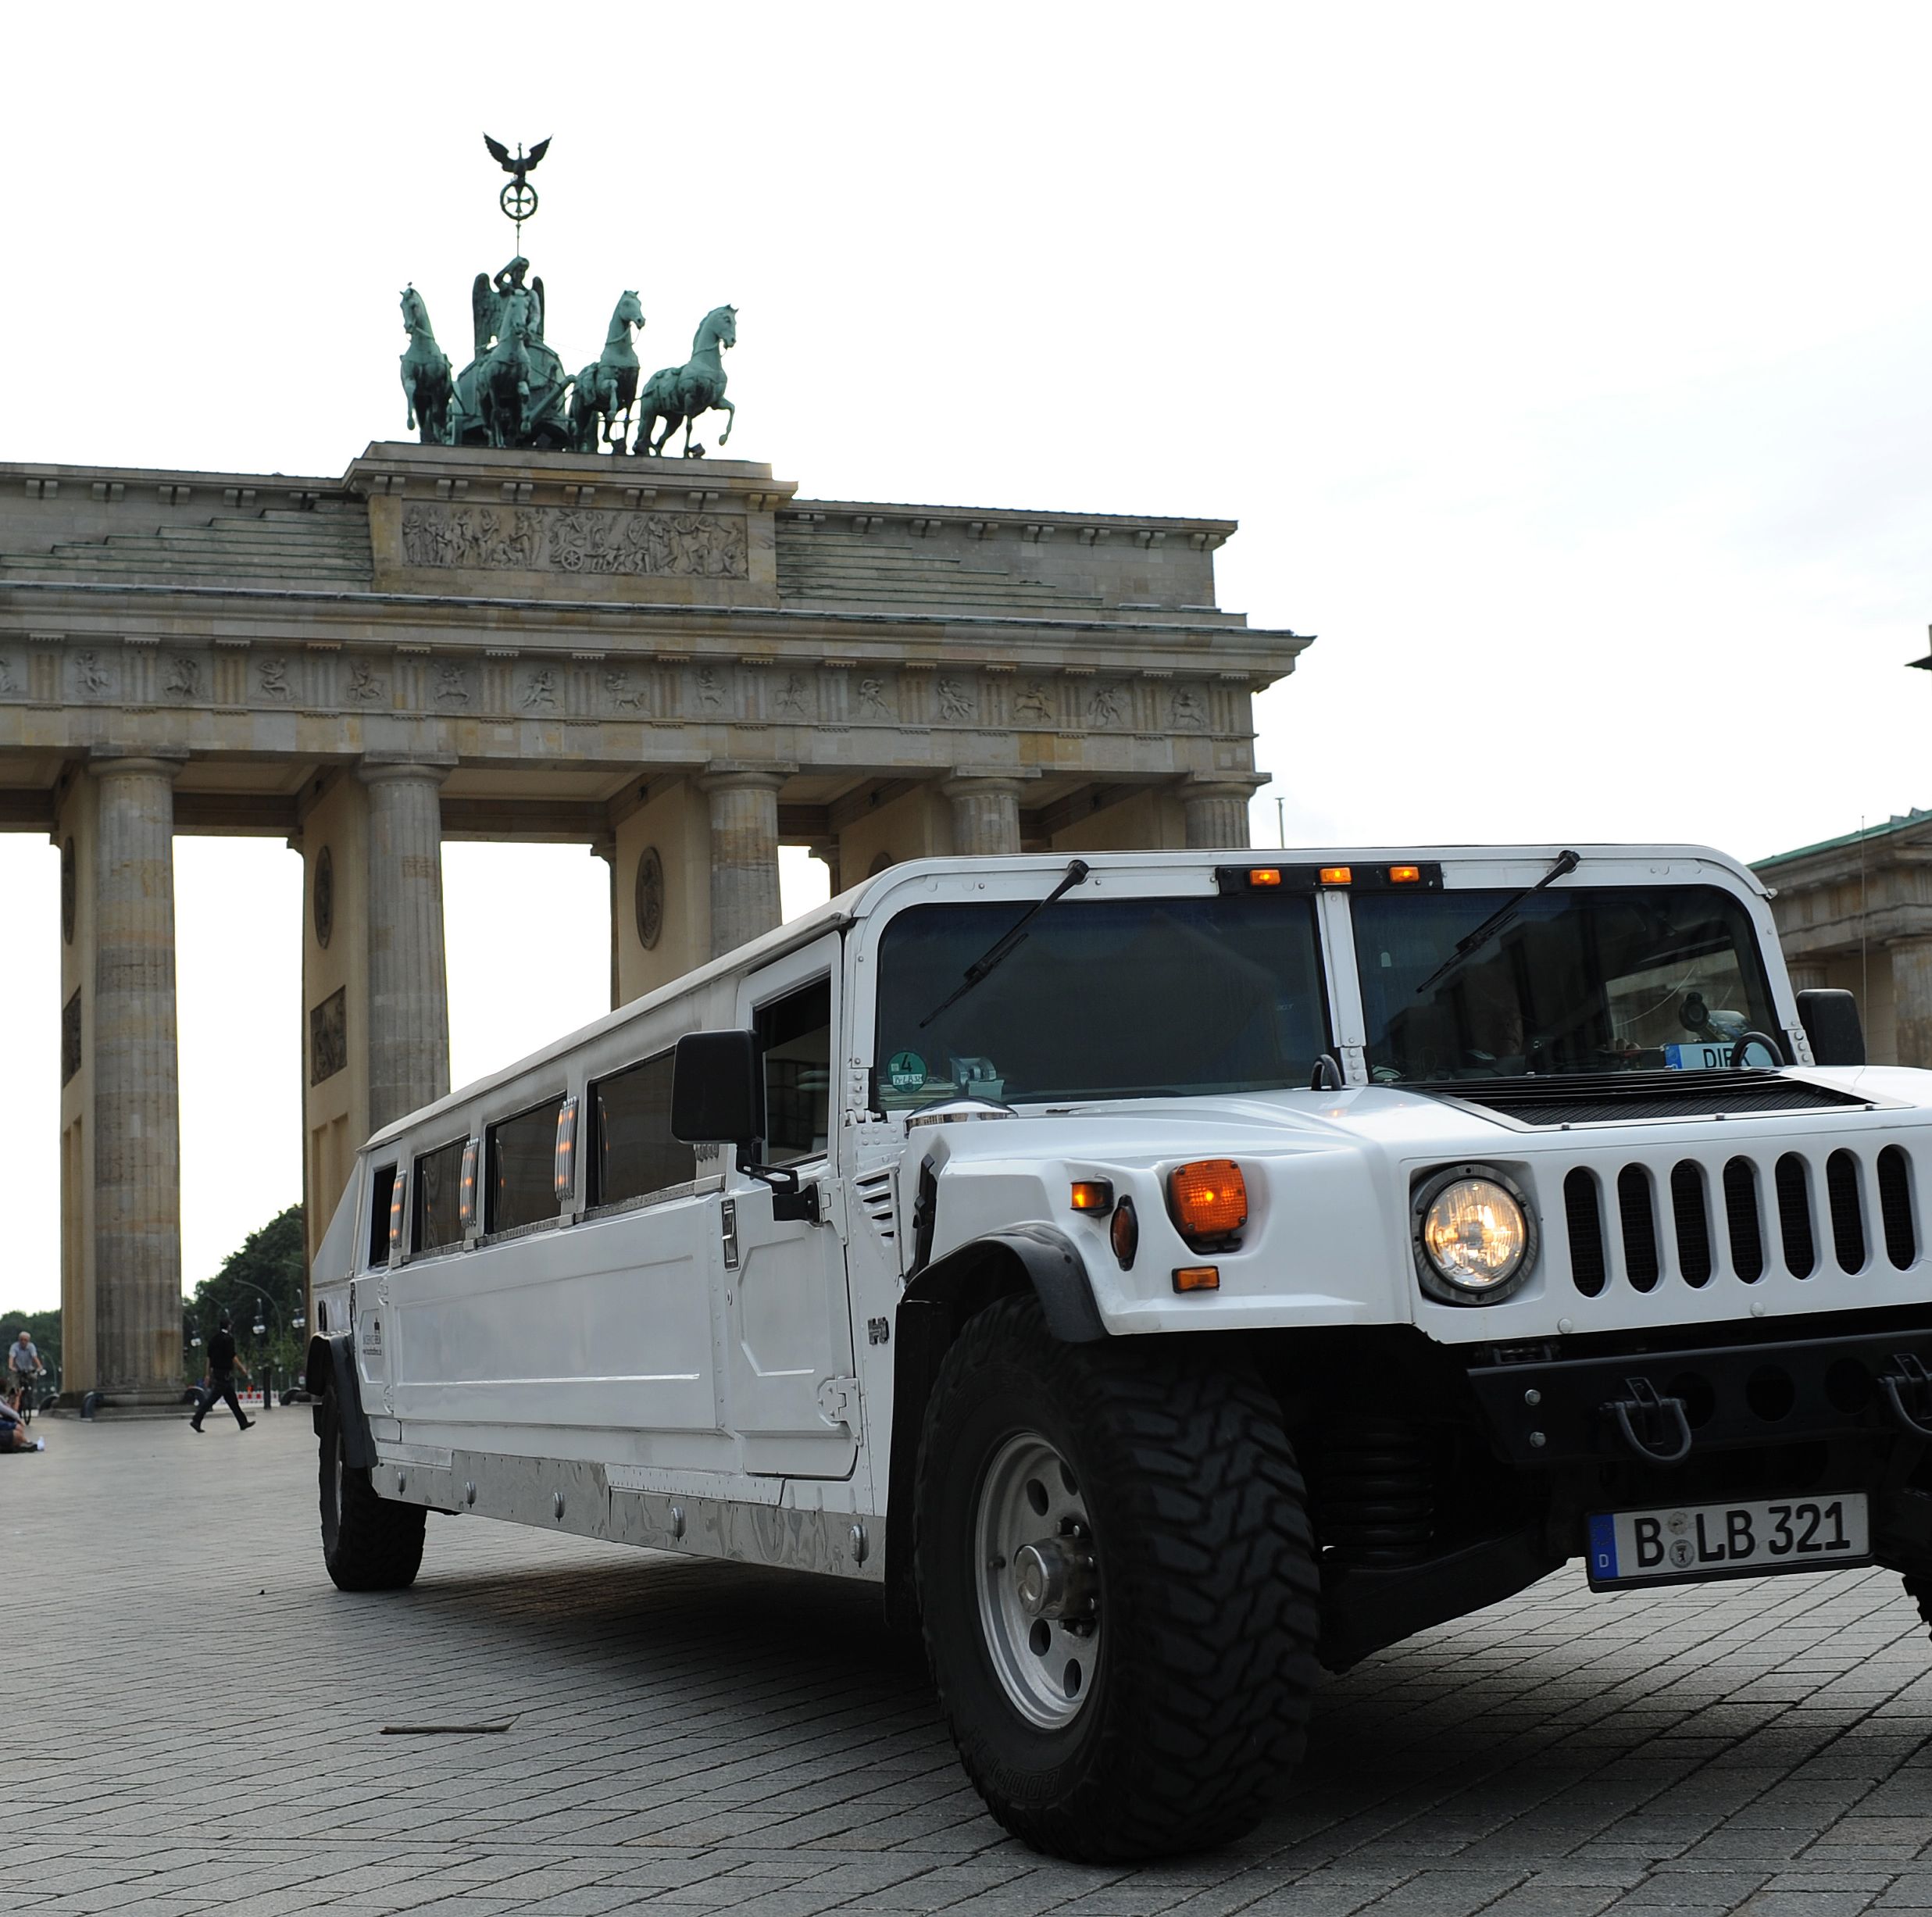 Here's Why Limousine Rides Are about to Go Green